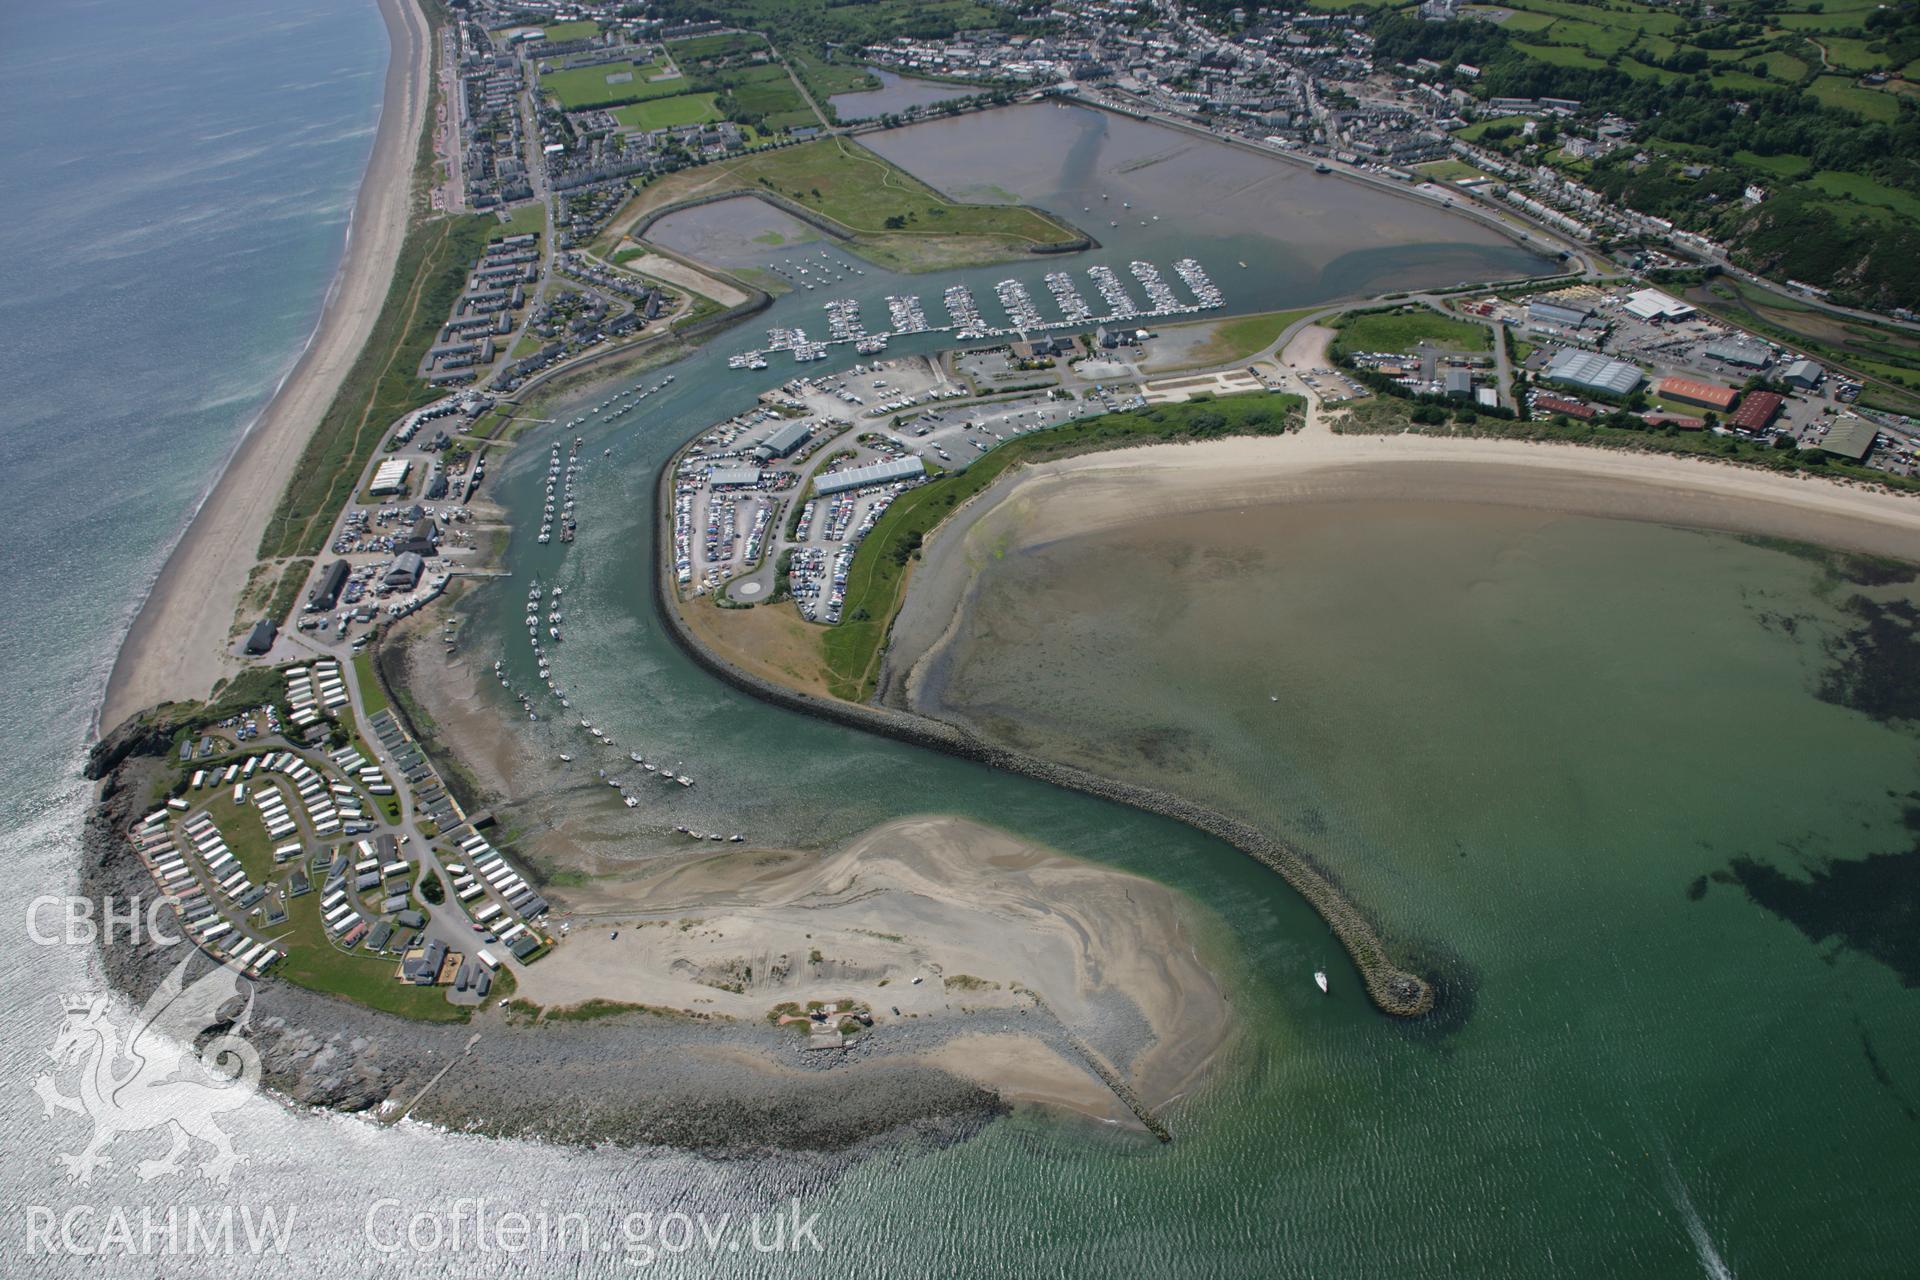 RCAHMW colour oblique aerial photograph of Pwllheli Harbour looking west. Taken on 14 June 2006 by Toby Driver.